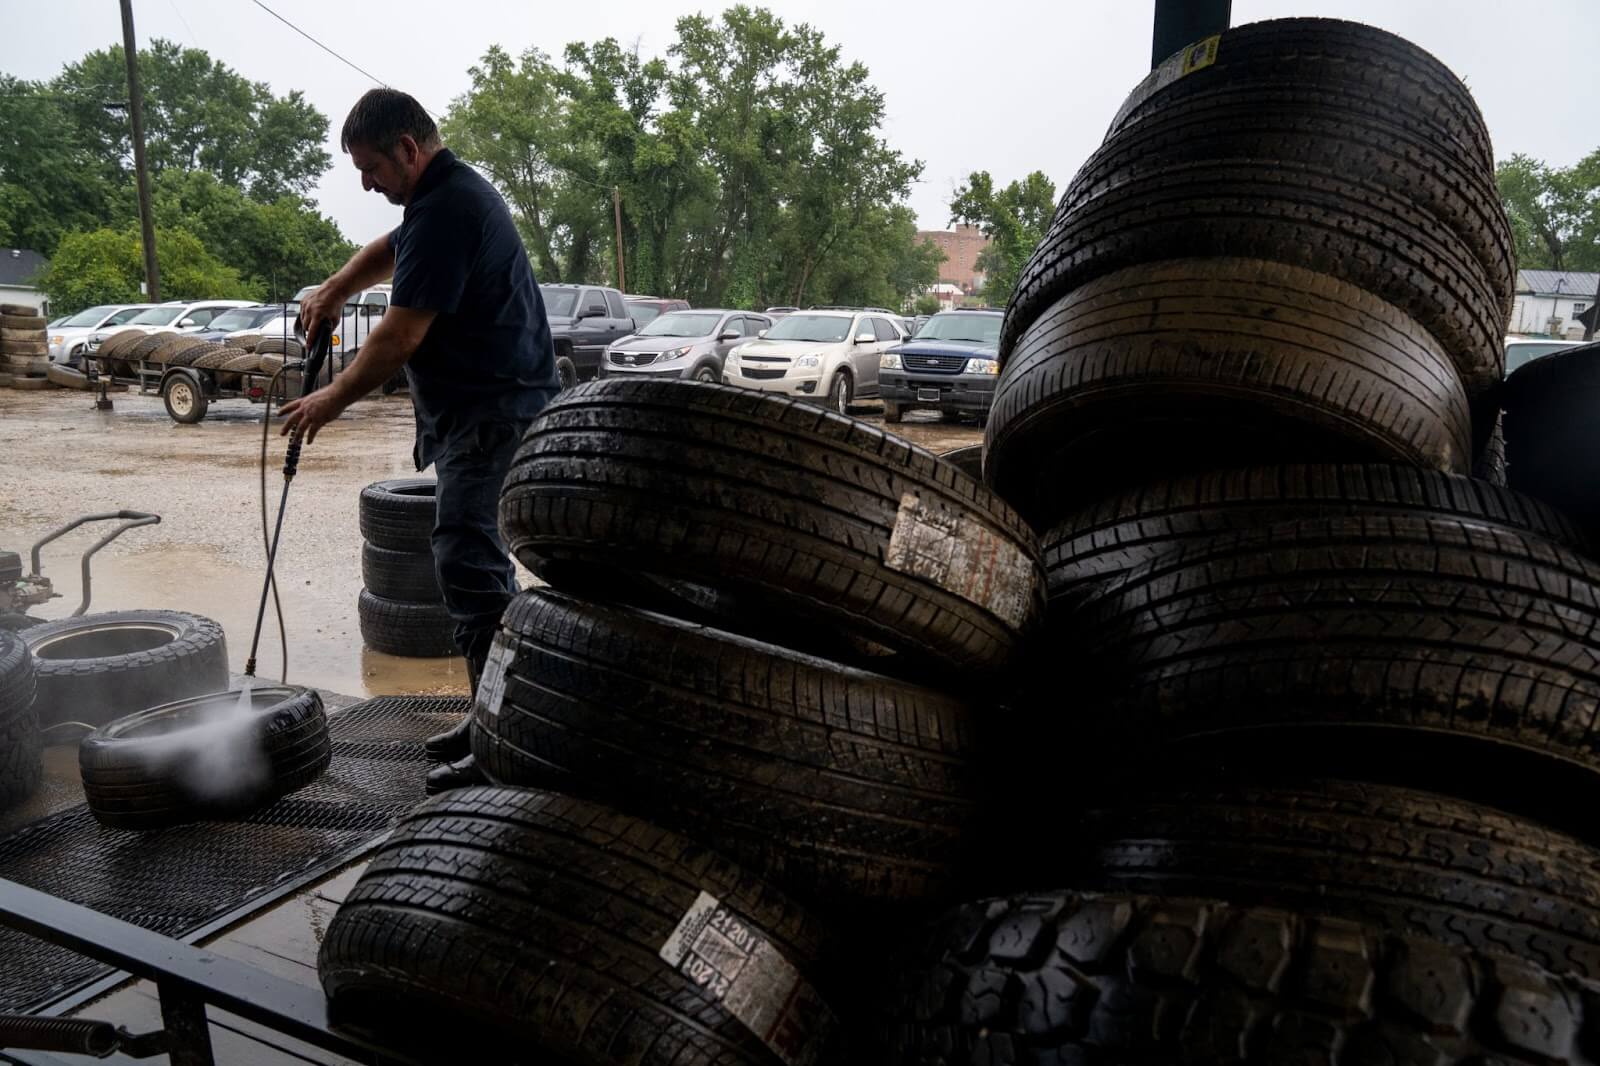 Discarded tires at a car alignment shop